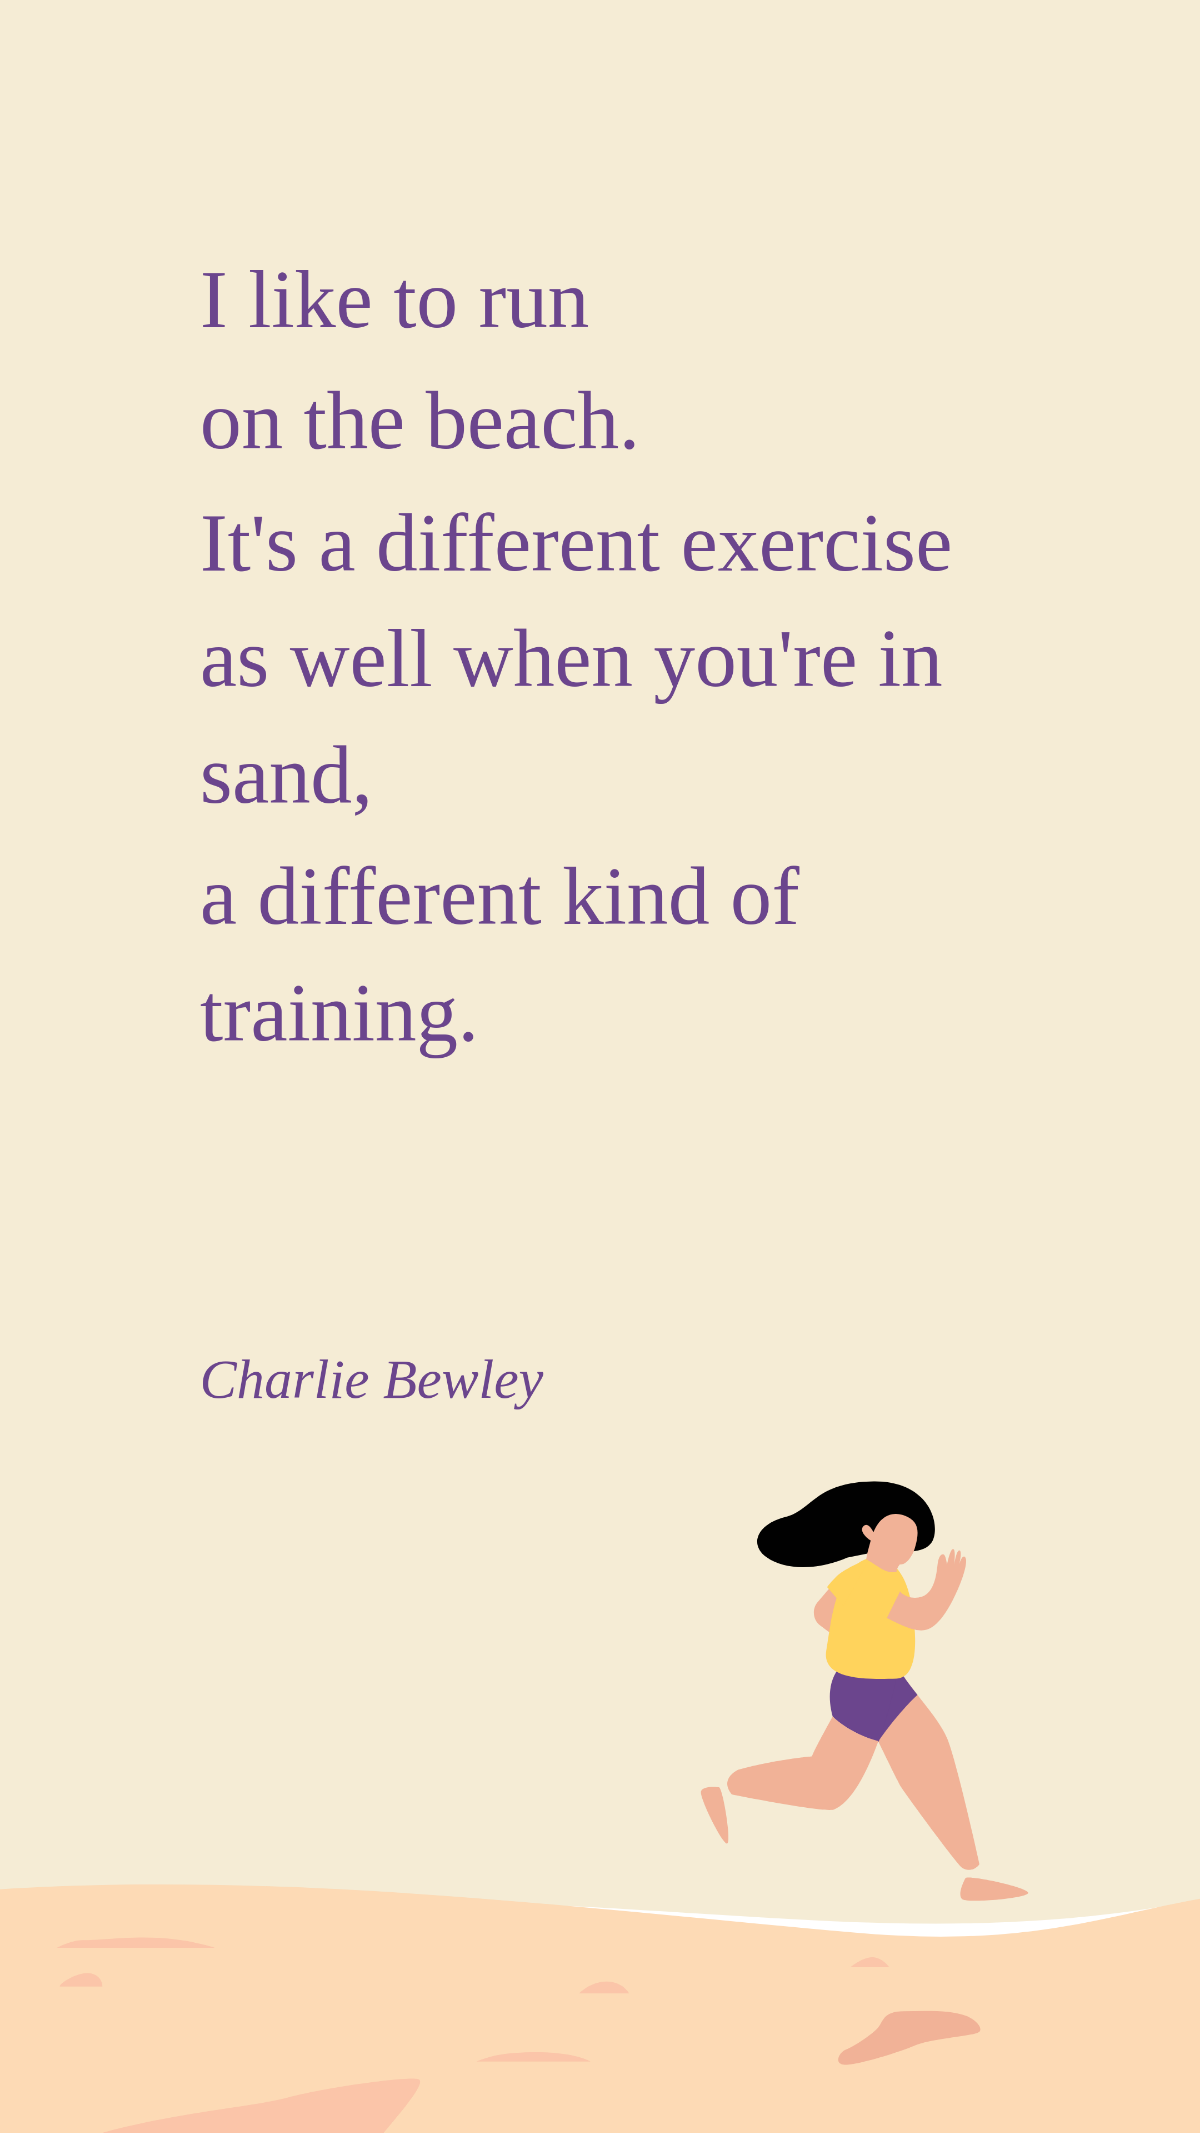 Free Charlie Bewley - I like to run on the beach. It's a different exercise as well when you're in sand, a different kind of training. Template